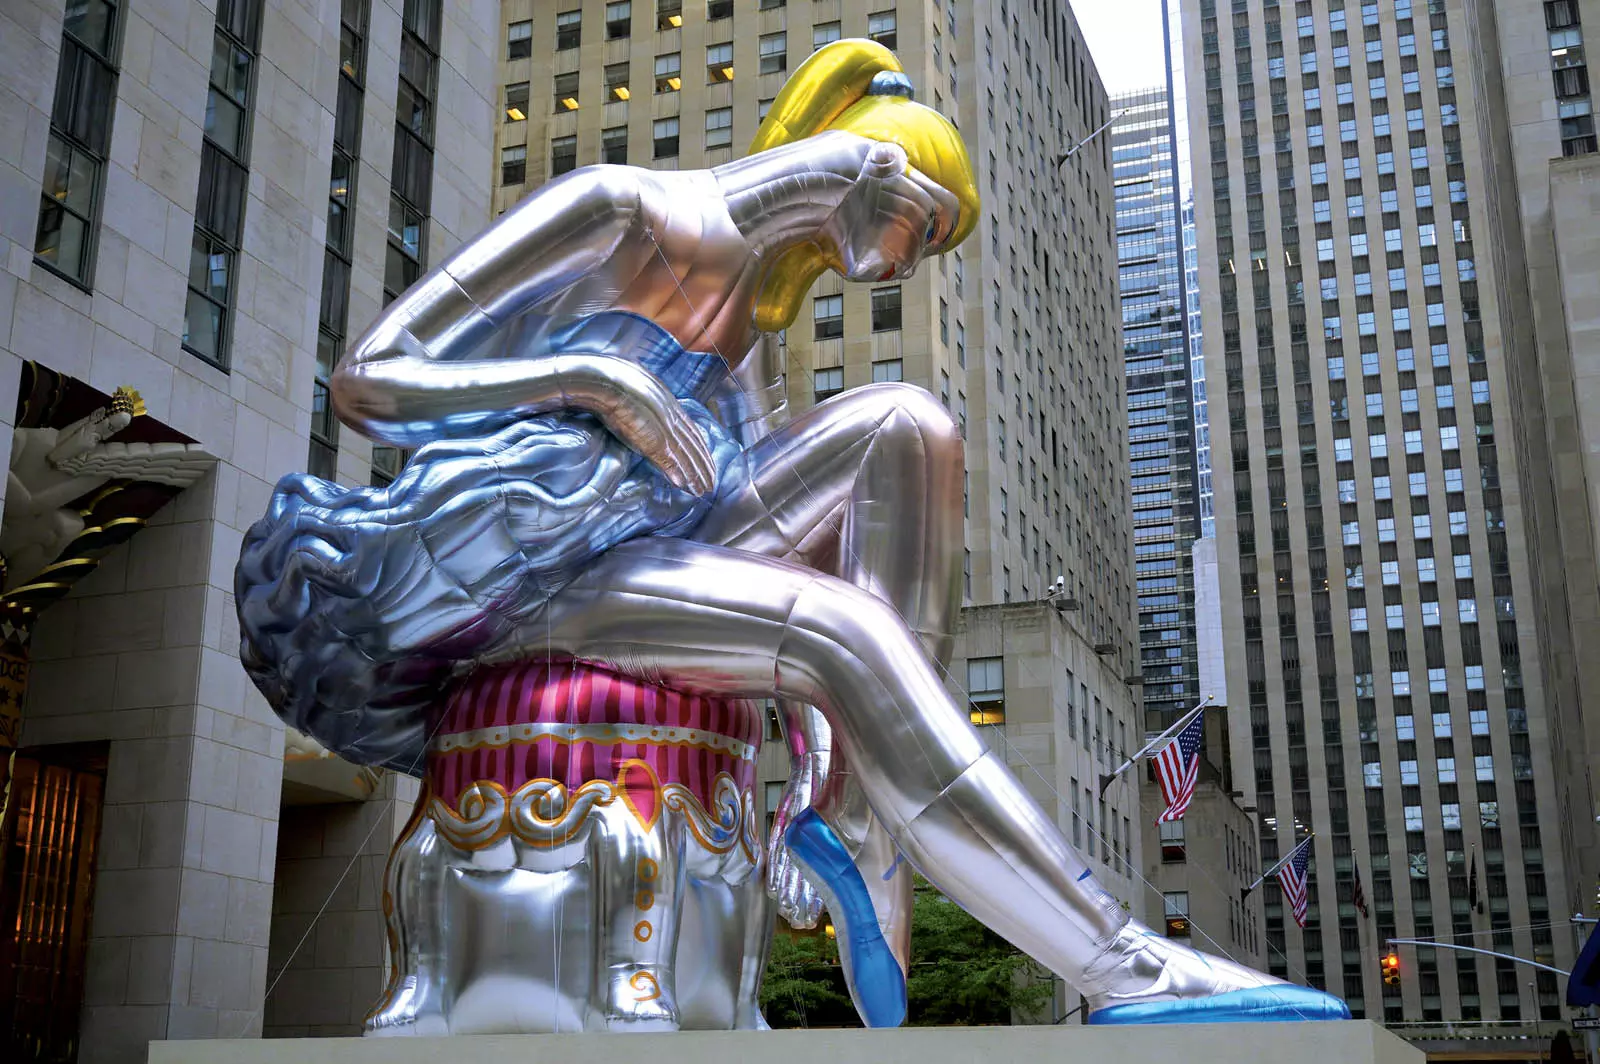 Giant Inflatable Seated Ballerina Art Installation by Jeff Koons